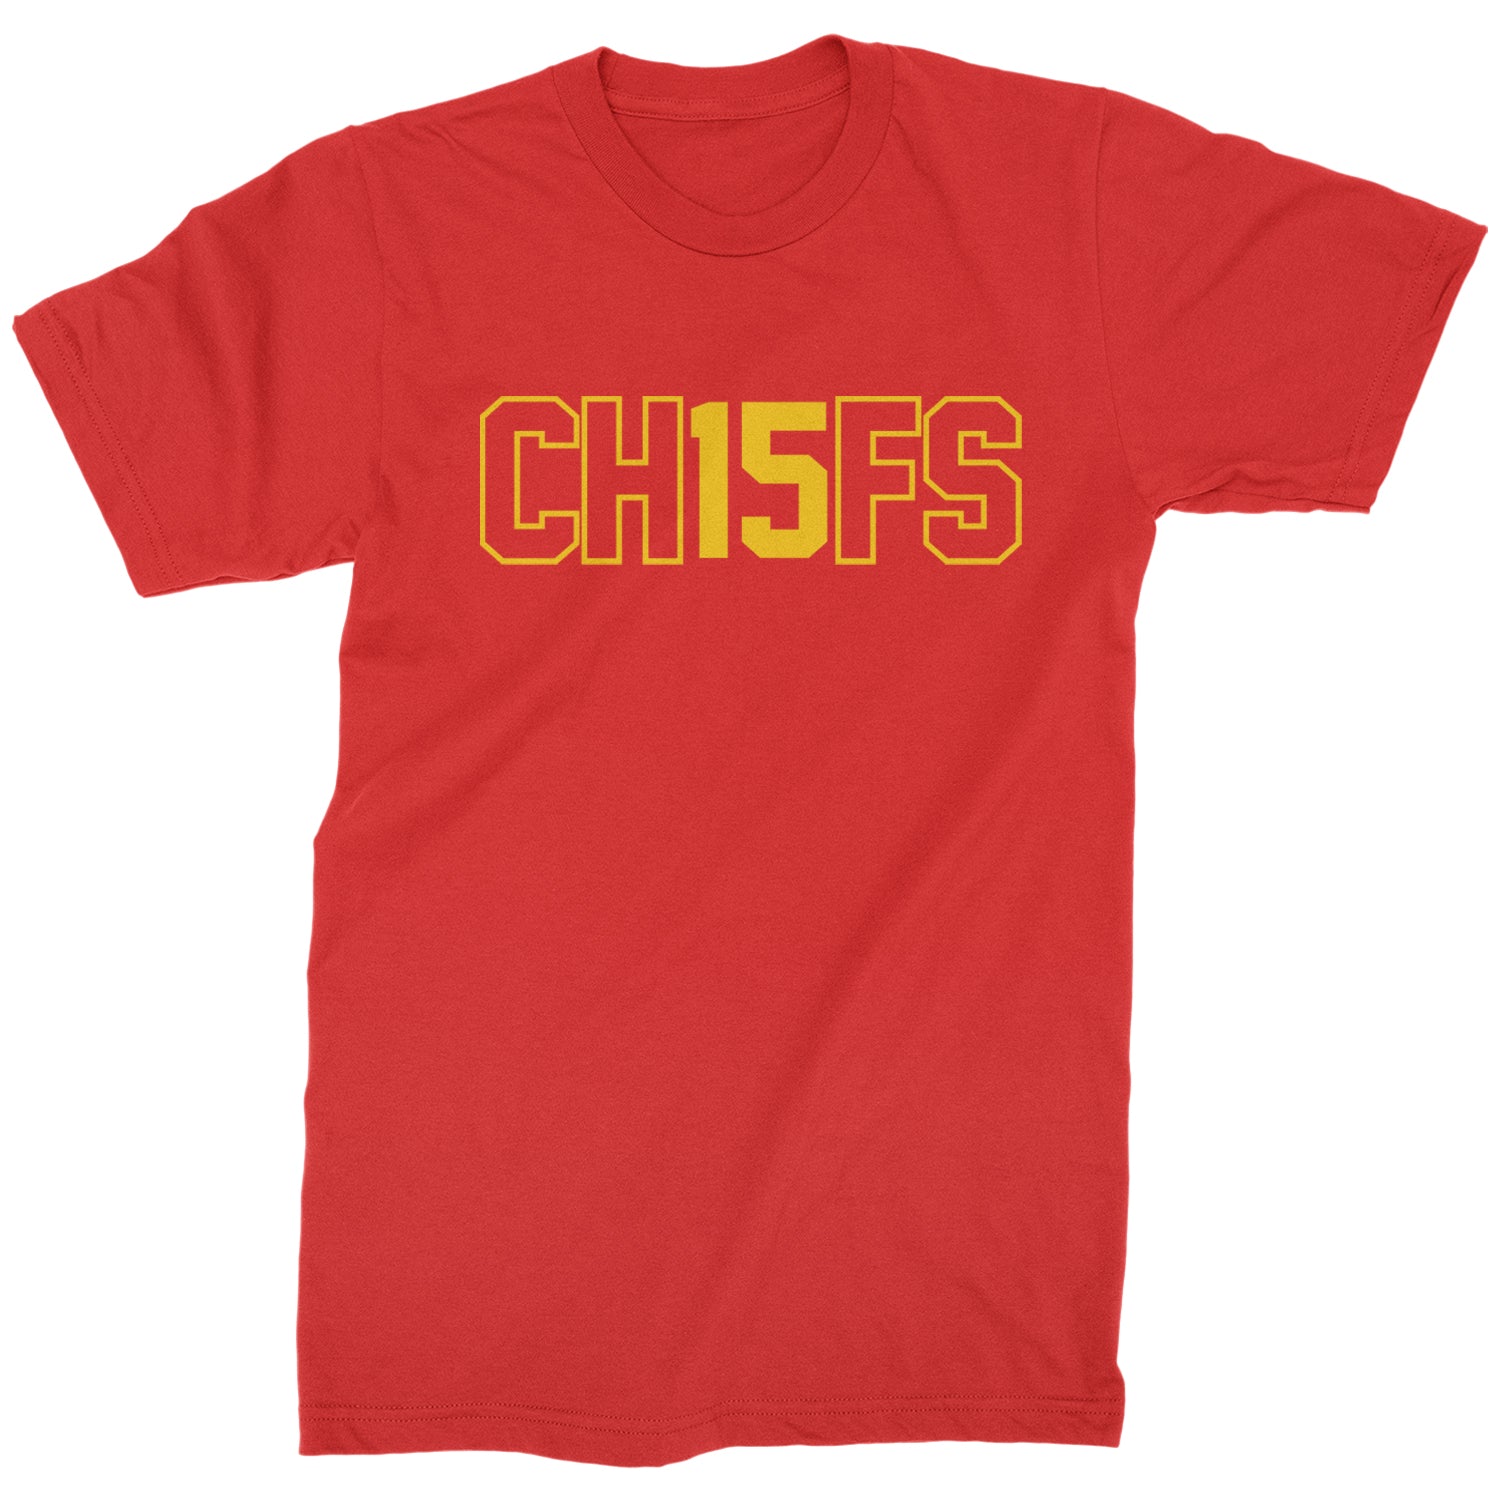 Ch15fs Chief 15 Shirt Mens T-shirt ass, big, burrowhead, game, kelce, know, moutha, my, nd, patrick, role, shut, sports, your by Expression Tees